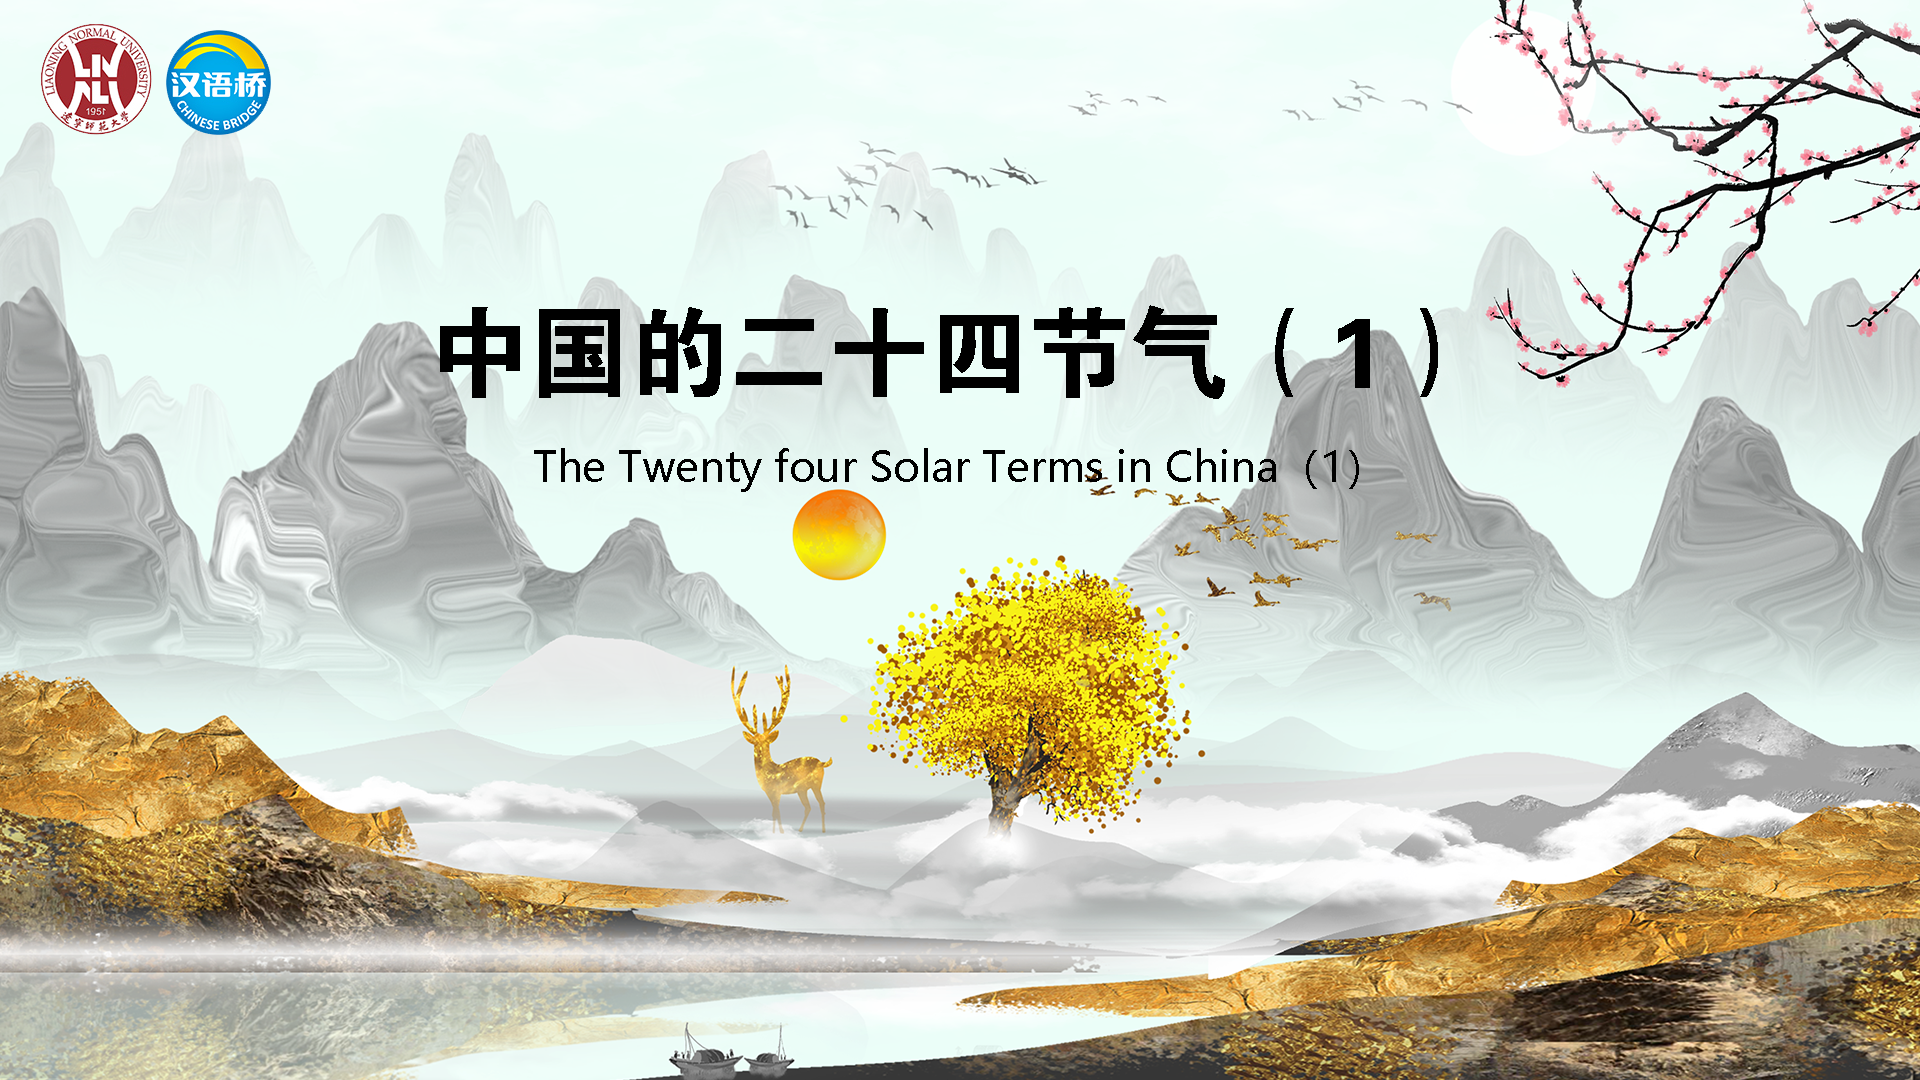 The Twenty four Solar Terms in China（1）